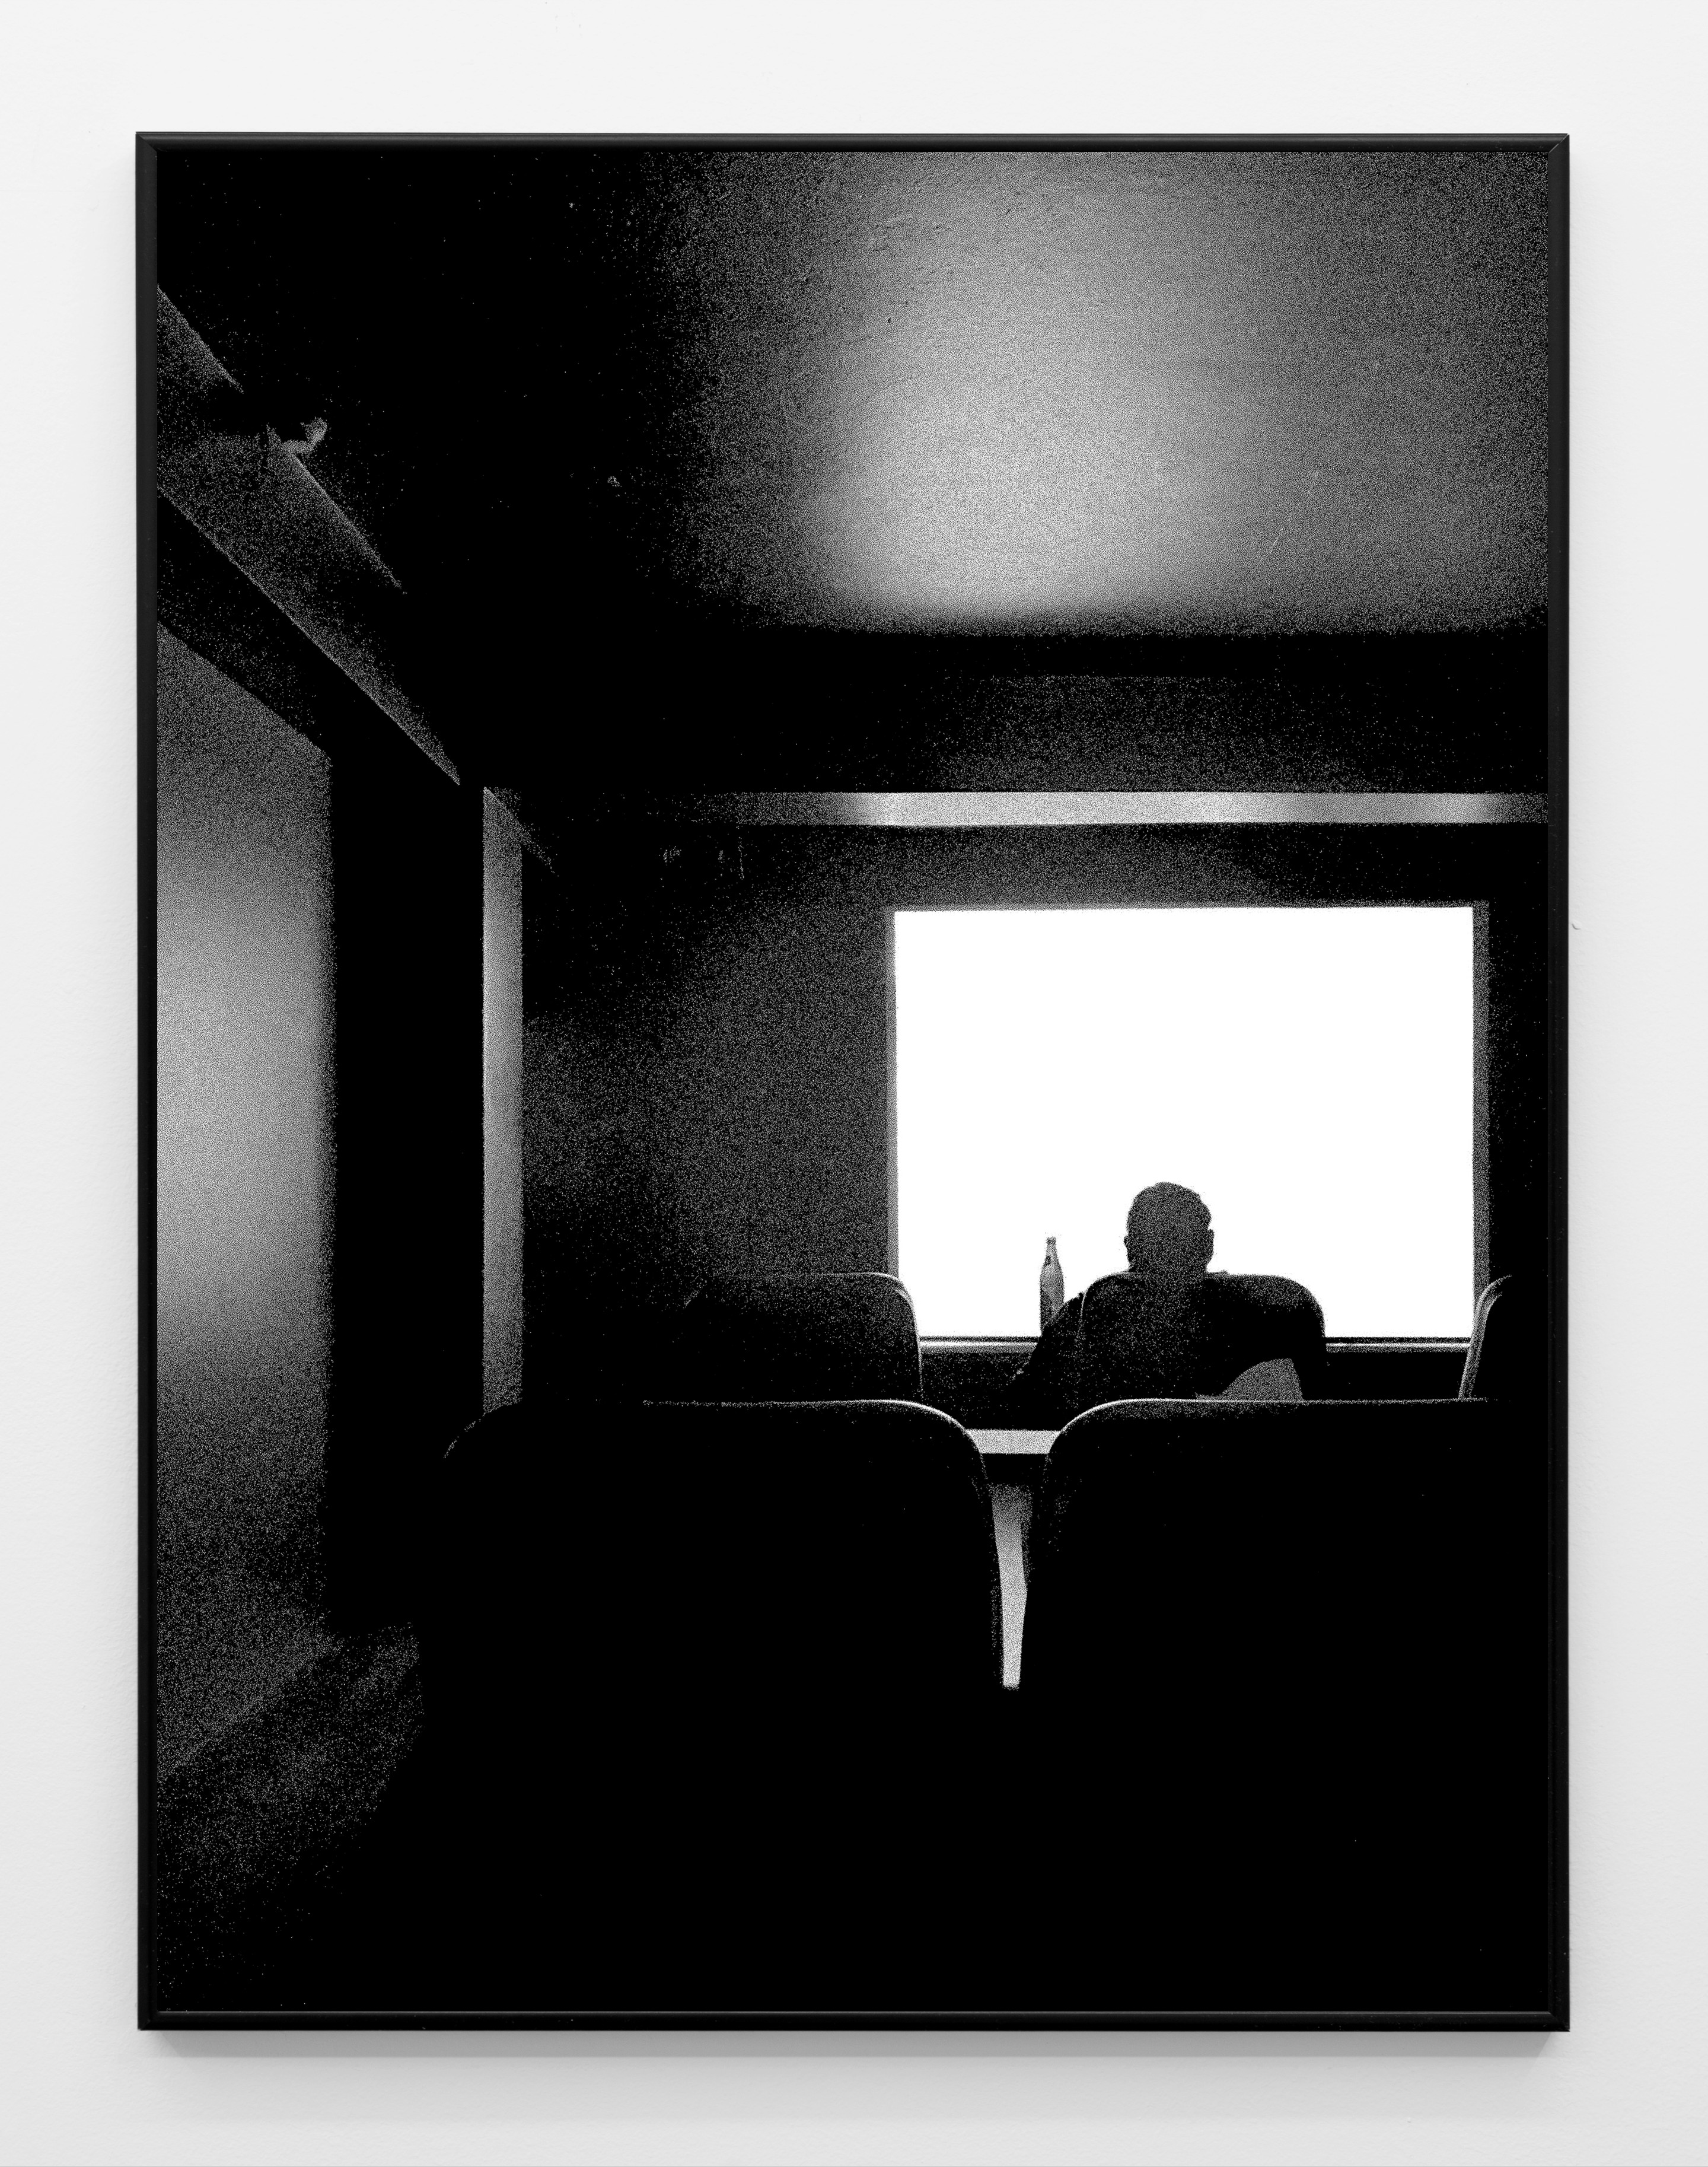 Being Alone (2022)

Archival inkjet print

23.4h x 16.5w inches (59.5h x 42w cm)